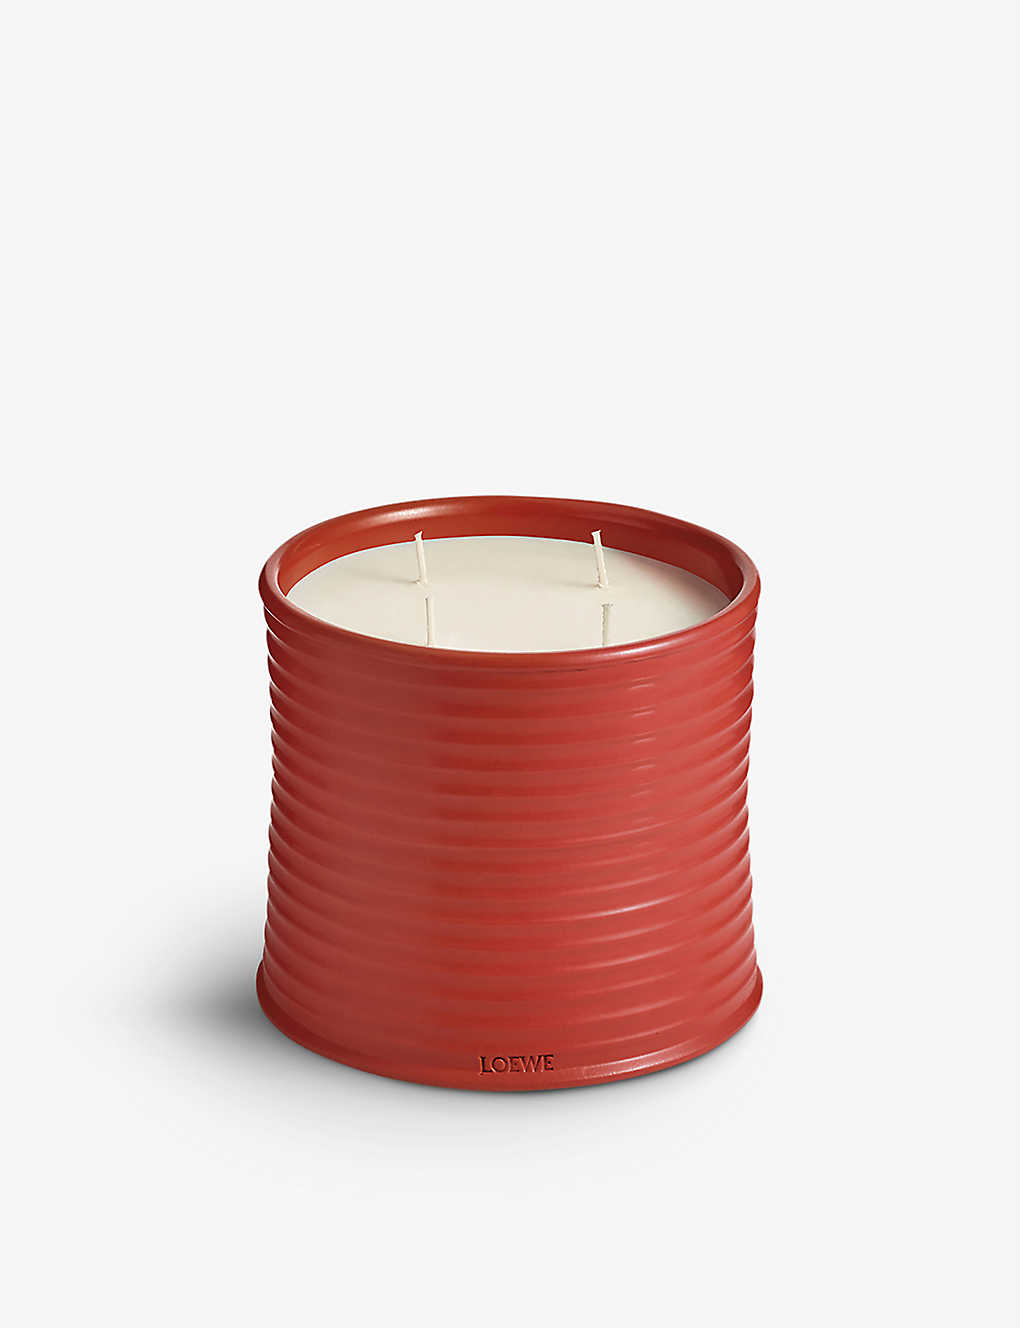 Loewe Tomato Leaves Large Scented Candle 2120g